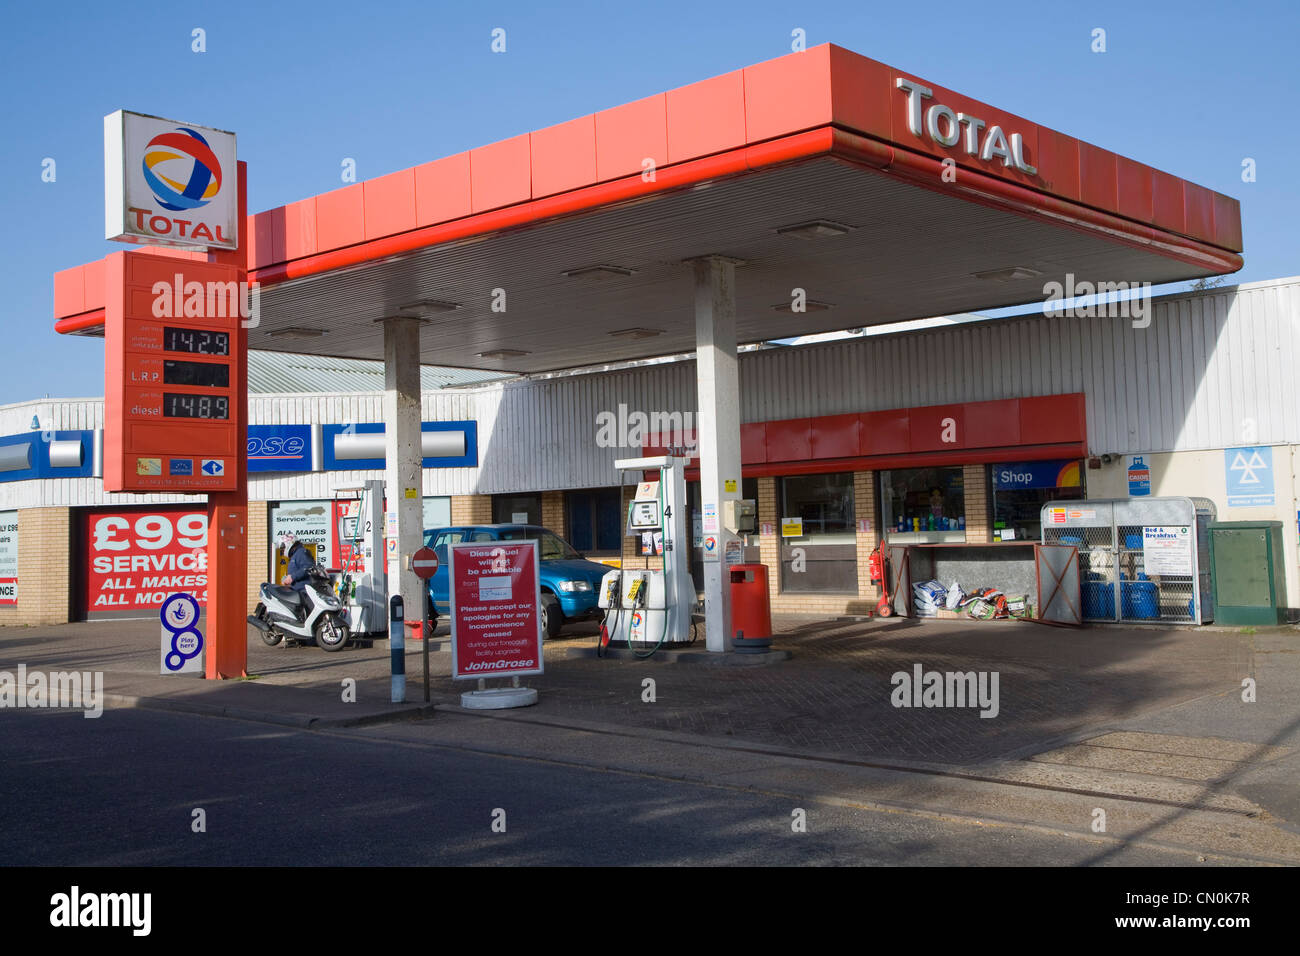 Diesel fuel not available Total petrol station sign Stock Photo